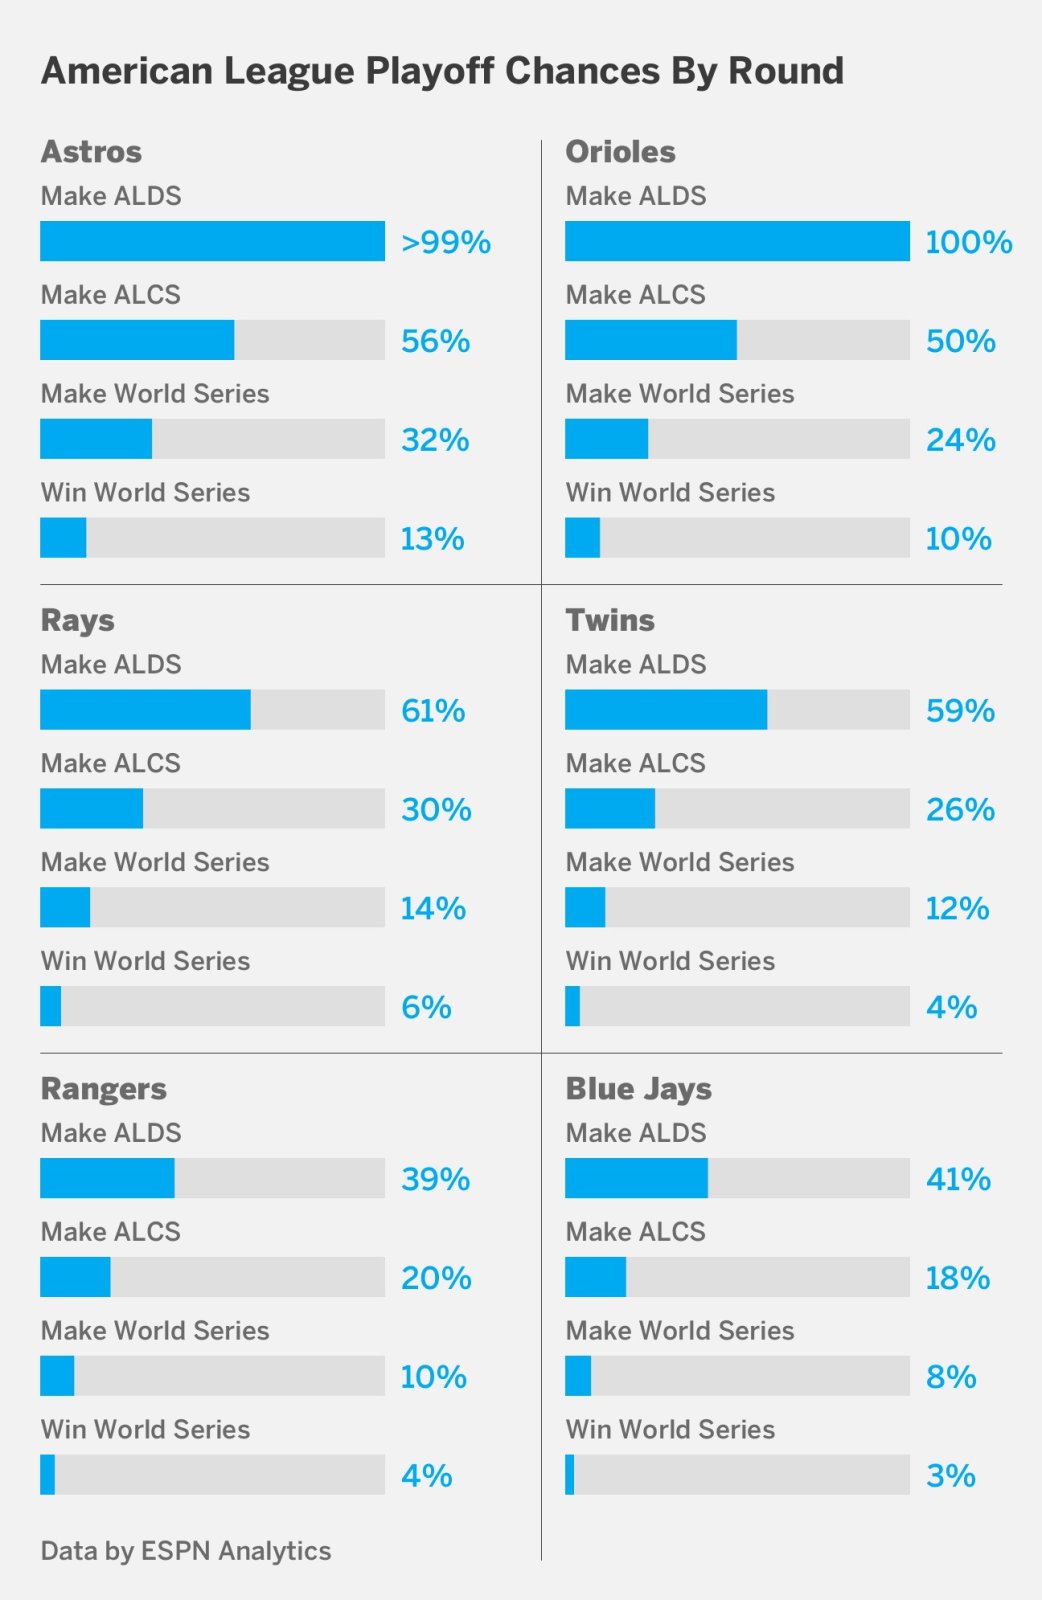 American League playoof chance by round.jpg